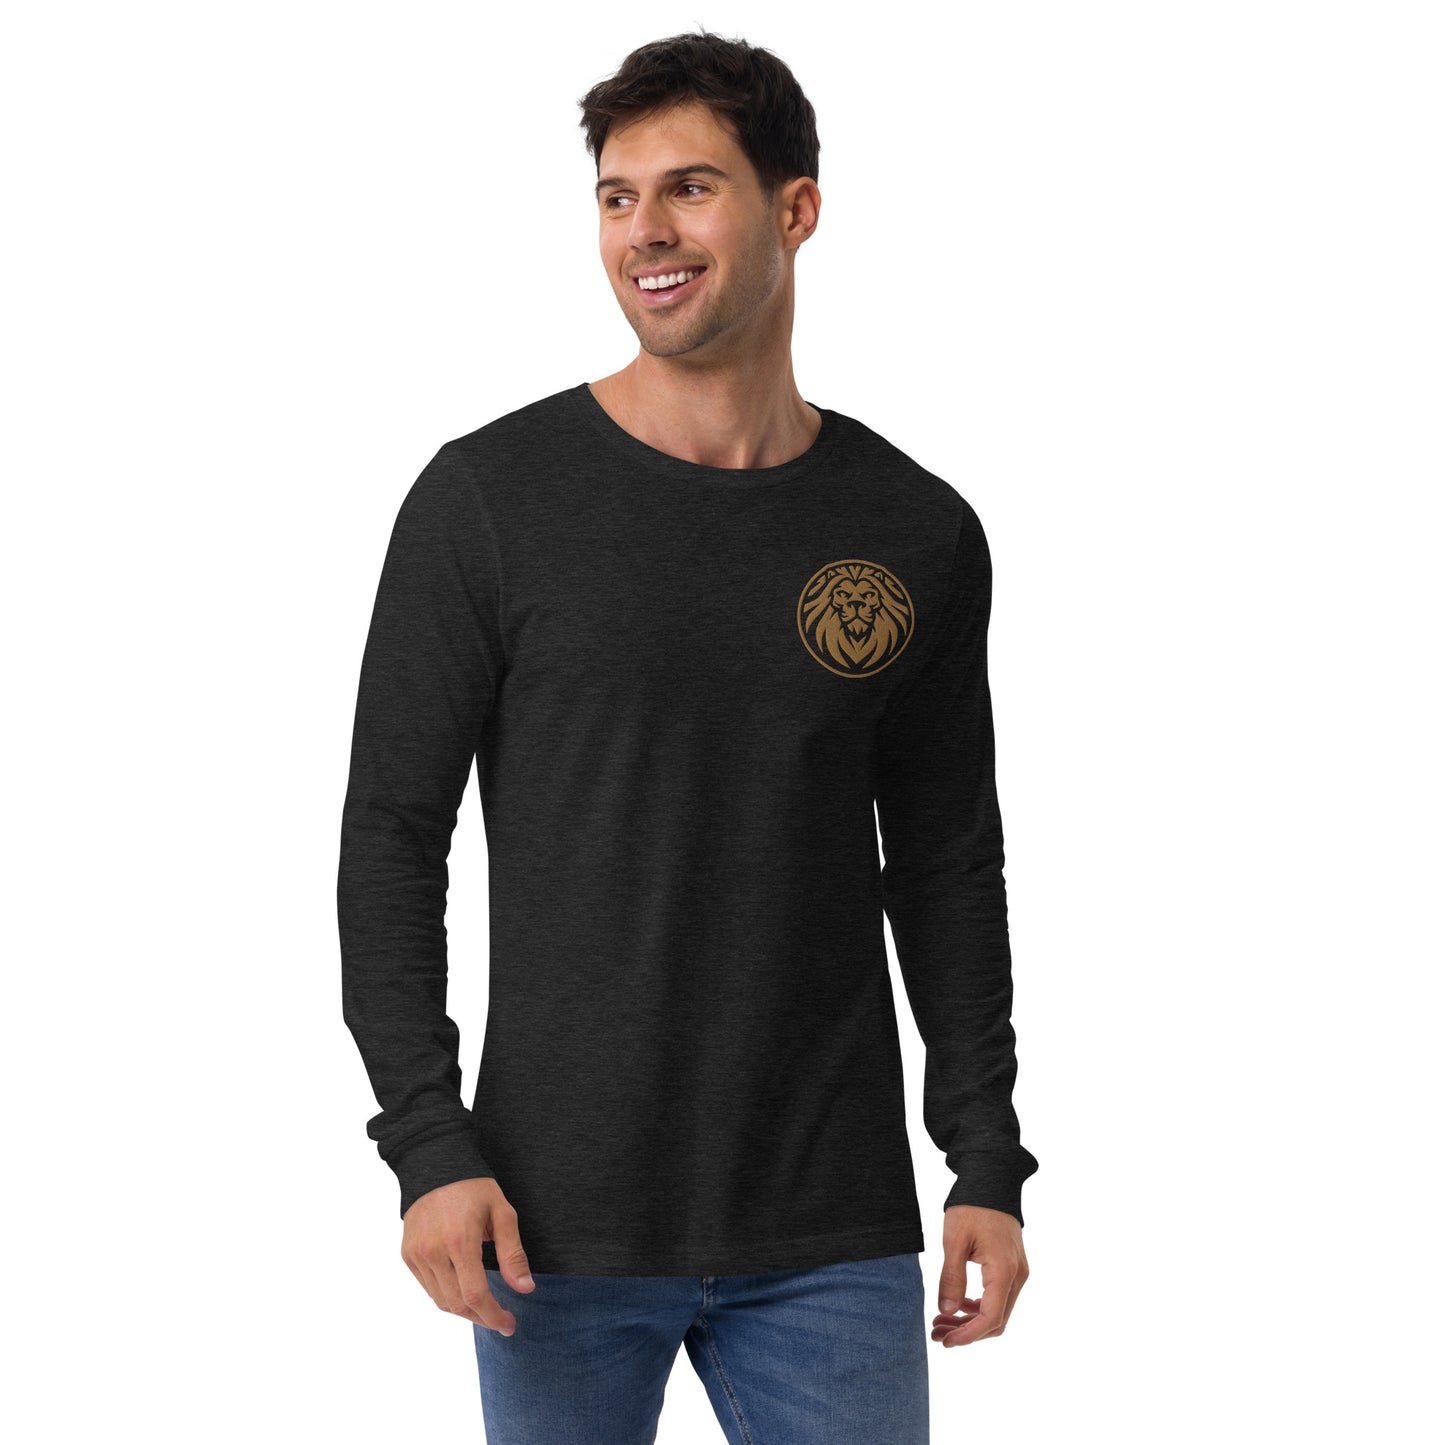 Singhster Long Sleeve Embroidered Tee